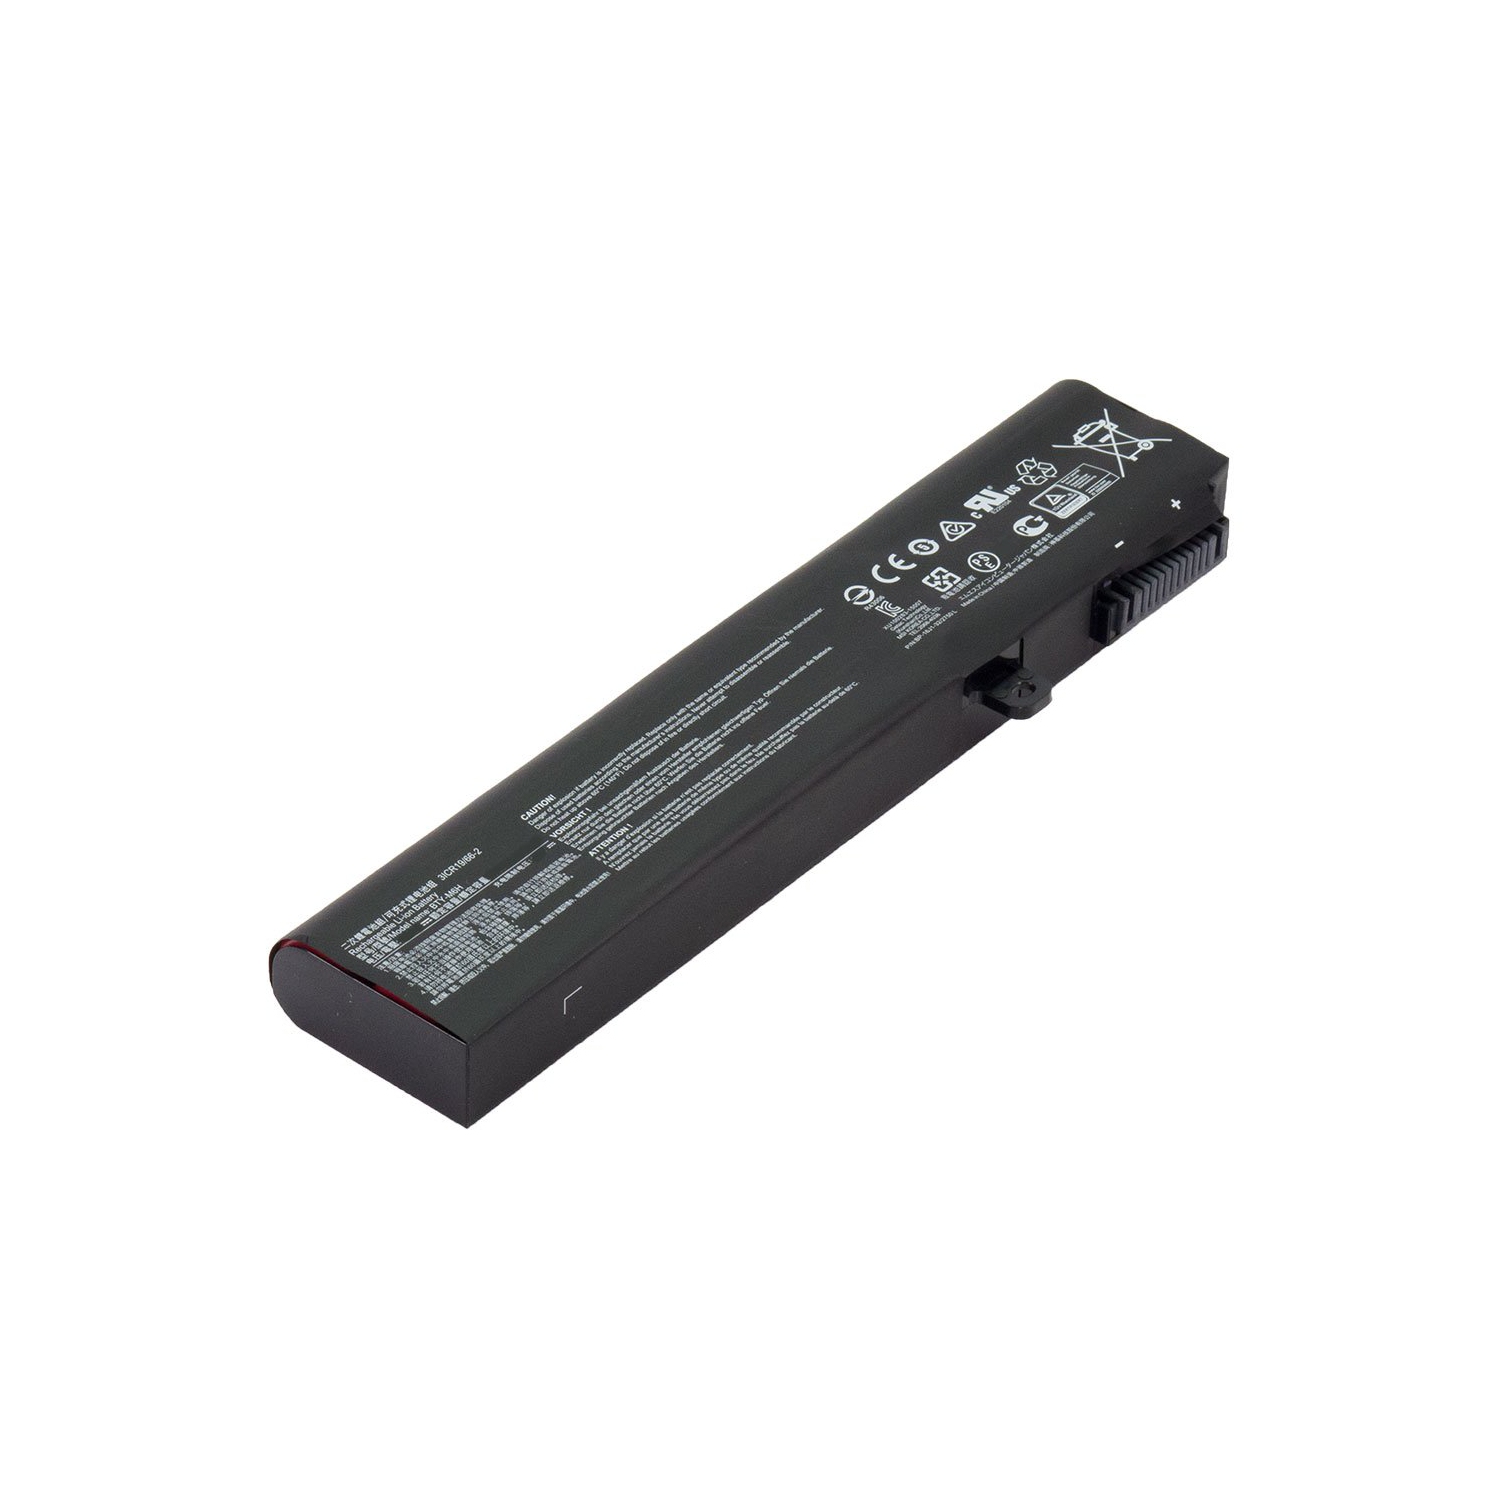 Laptop Battery Replacement for MSI GL62, 3ICR19/66-2, BTY-M6H